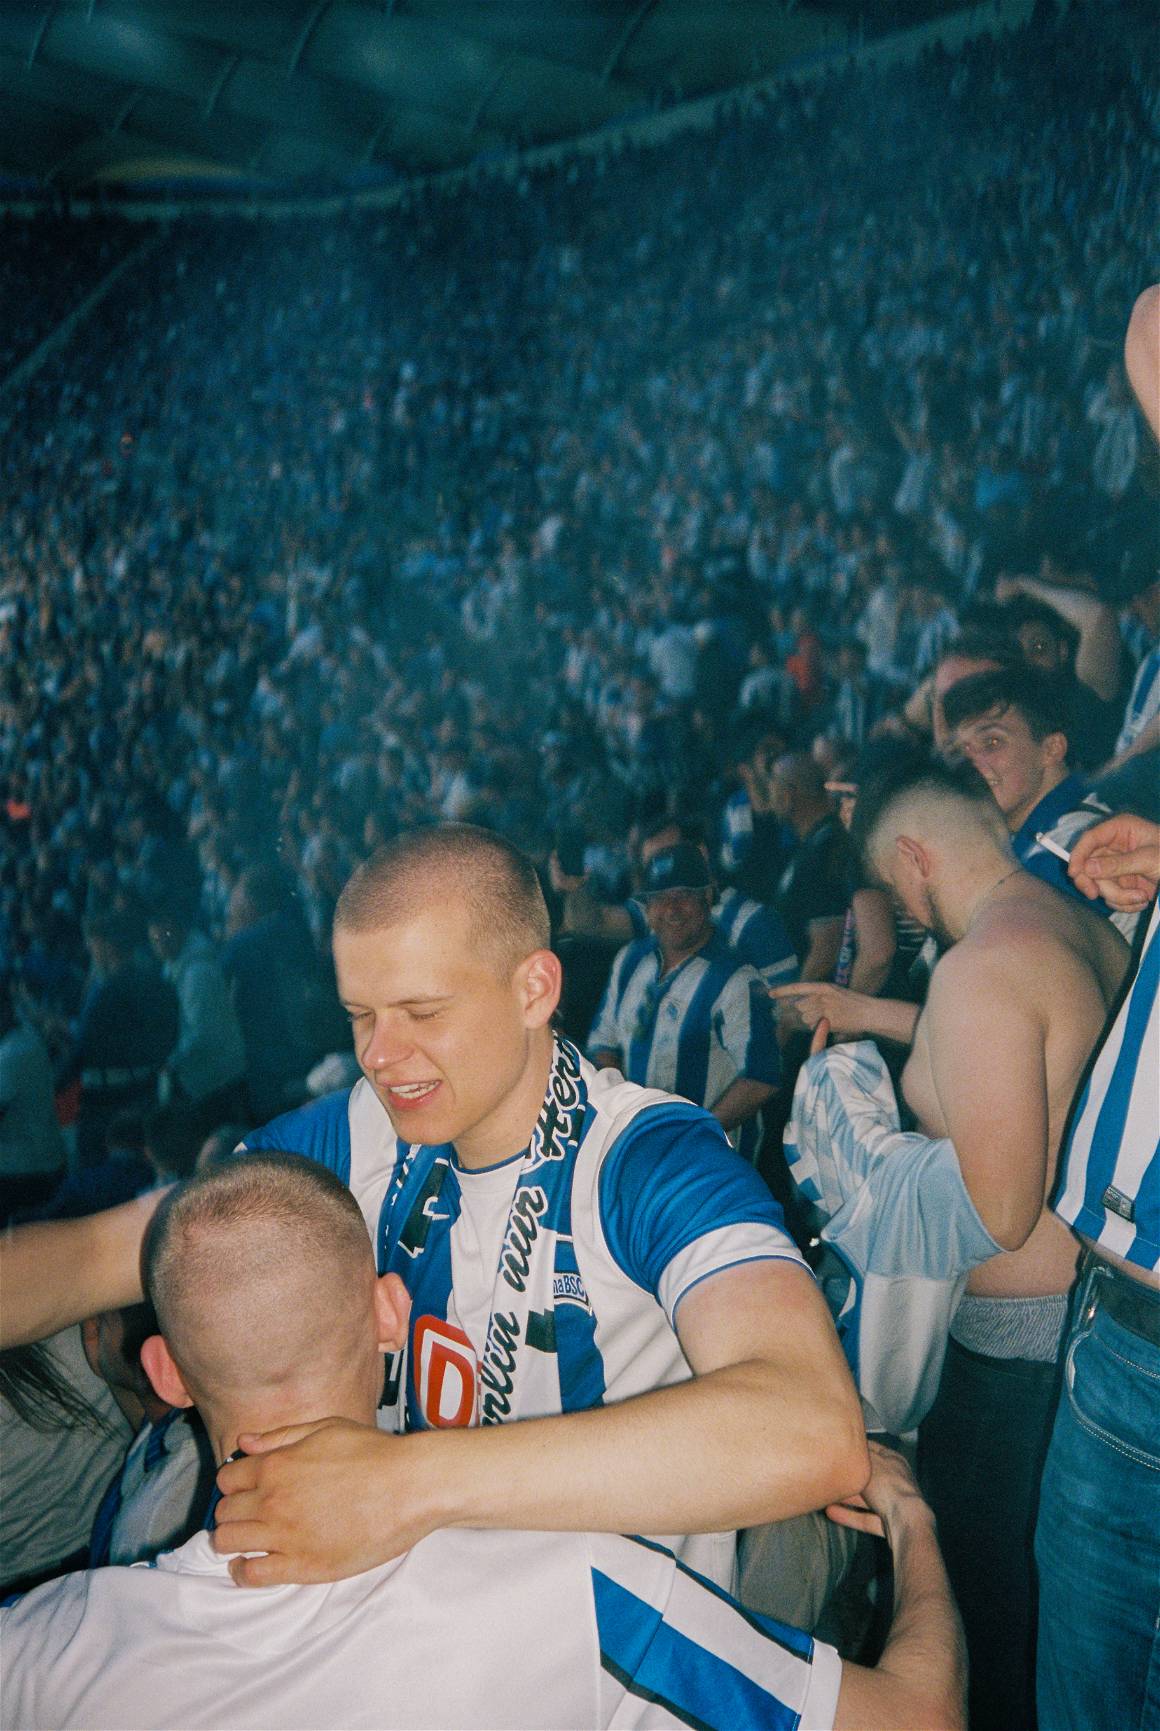 Hertha BSC, Love Never Gets Relegated